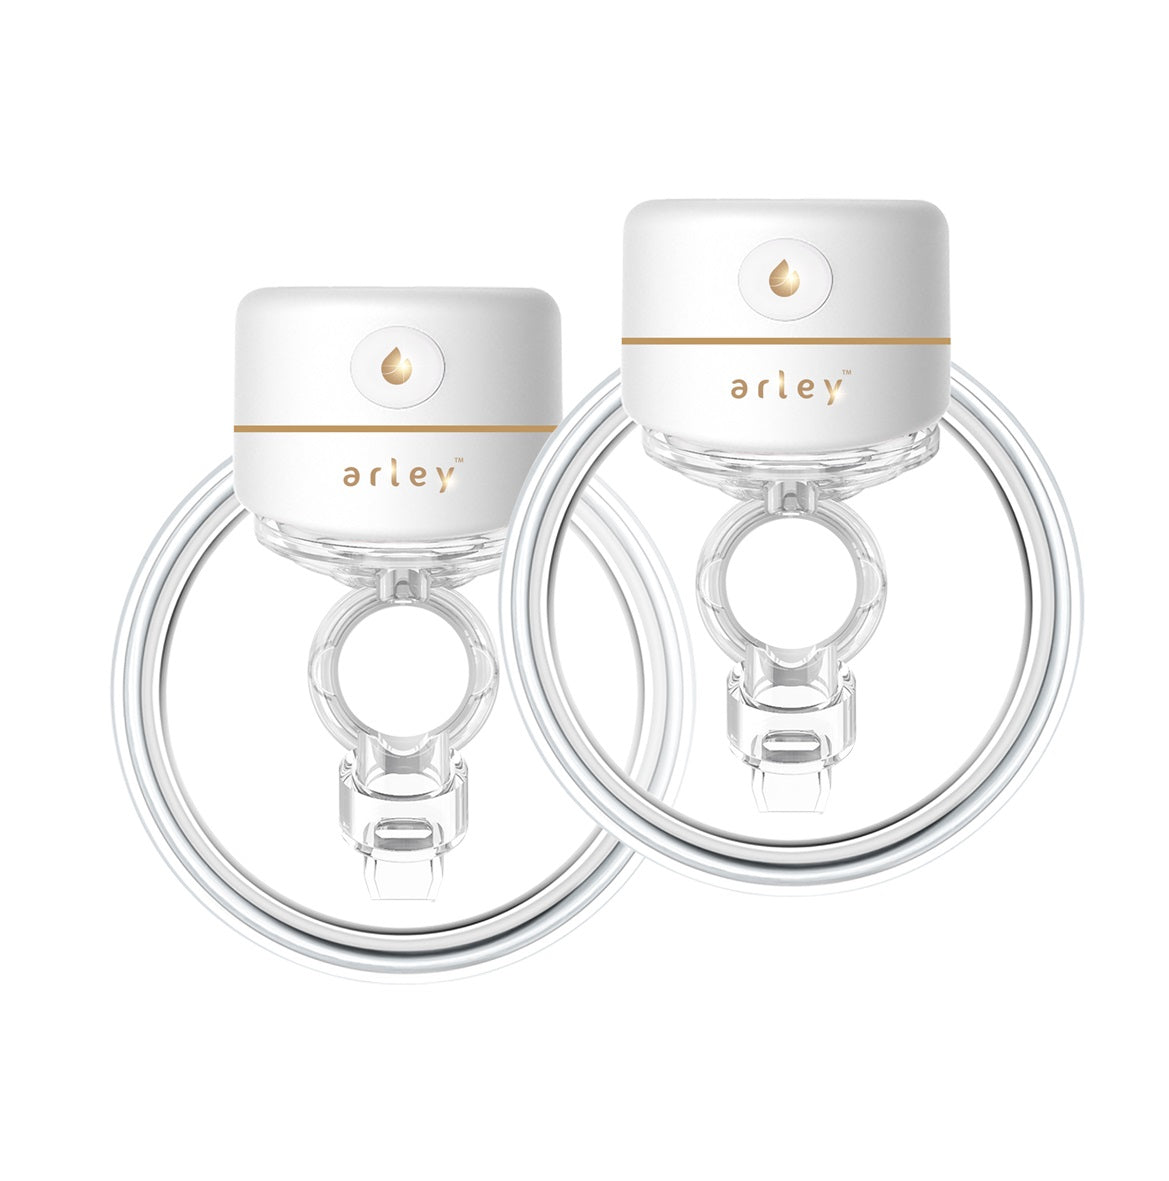 Arley Z10 ULTRA All-in-One Handsfree Breast Pump [DOUBLE PACK]